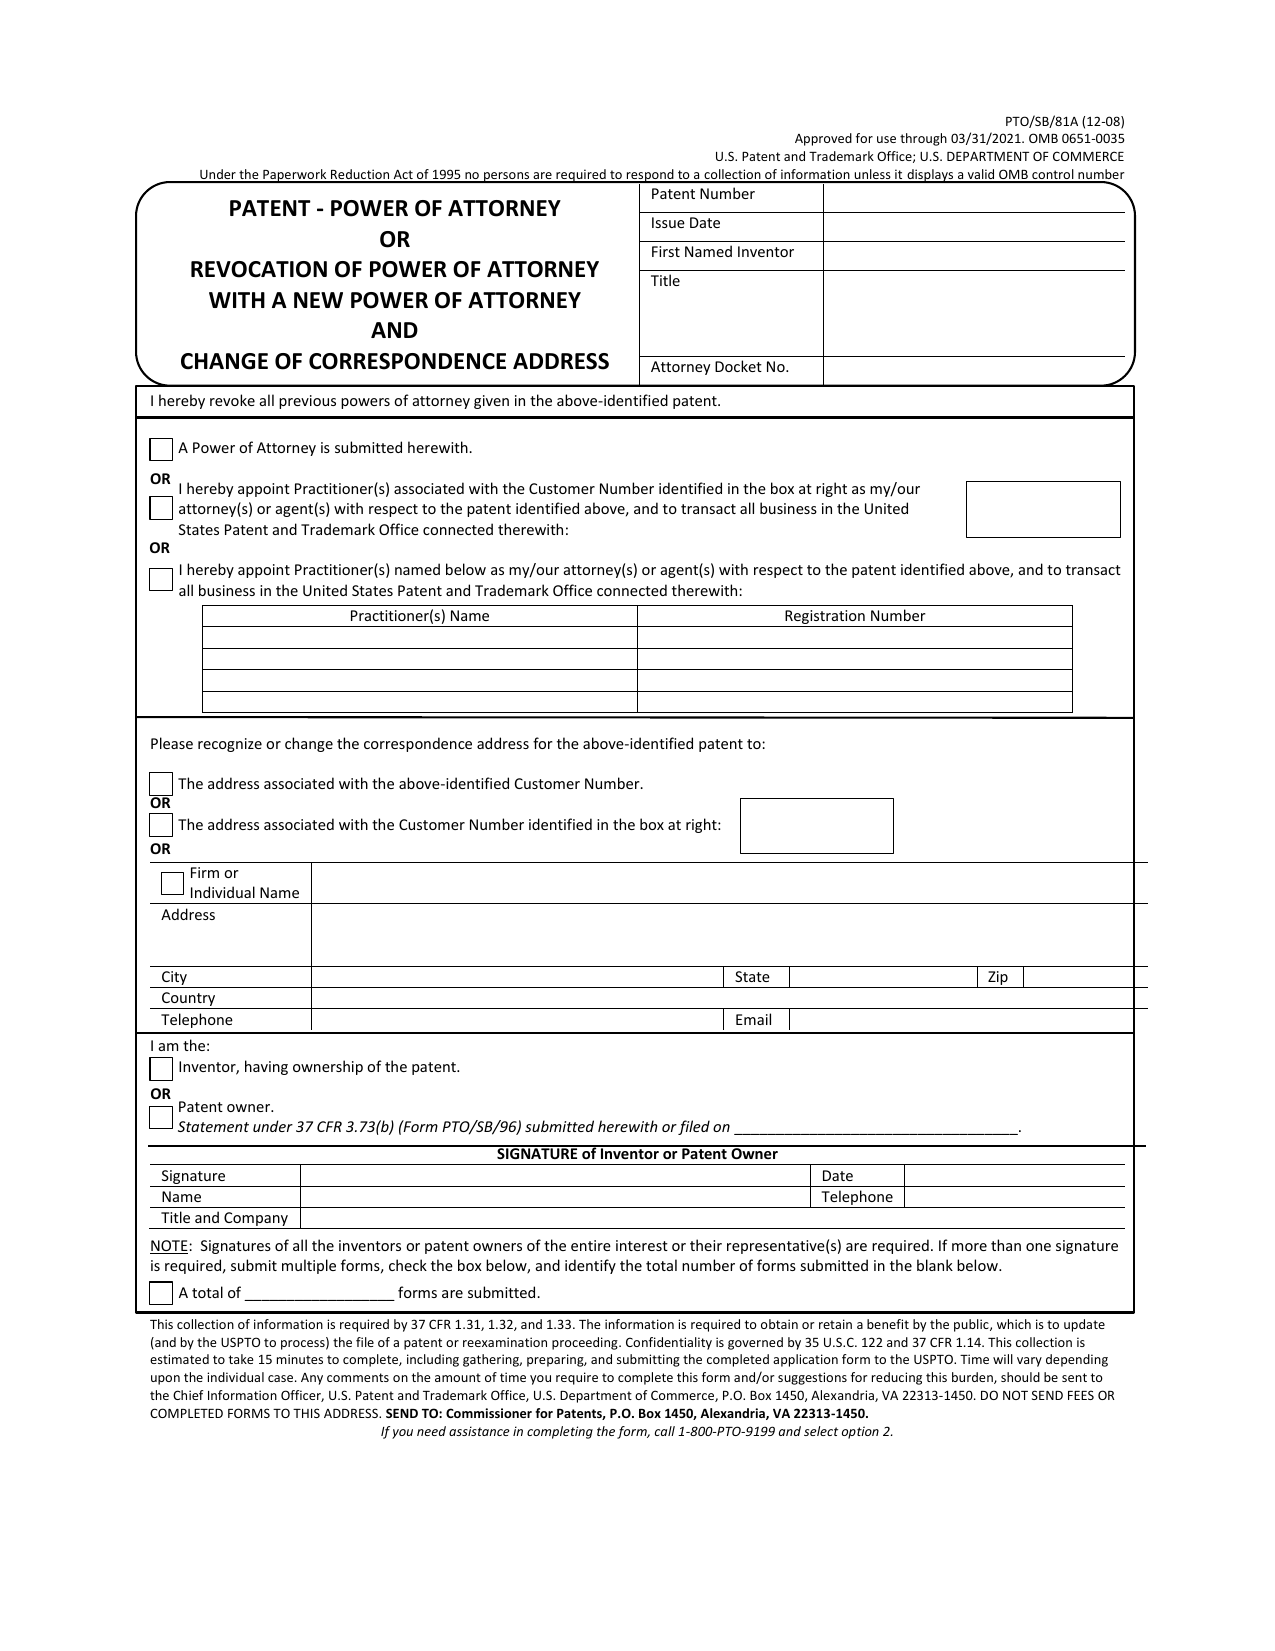 Form PTO/SB/81A Patent - Power of Attorney or Revocation of Power of Attorney With a New Power of Attorney and Change of Correspondence Address, Page 1